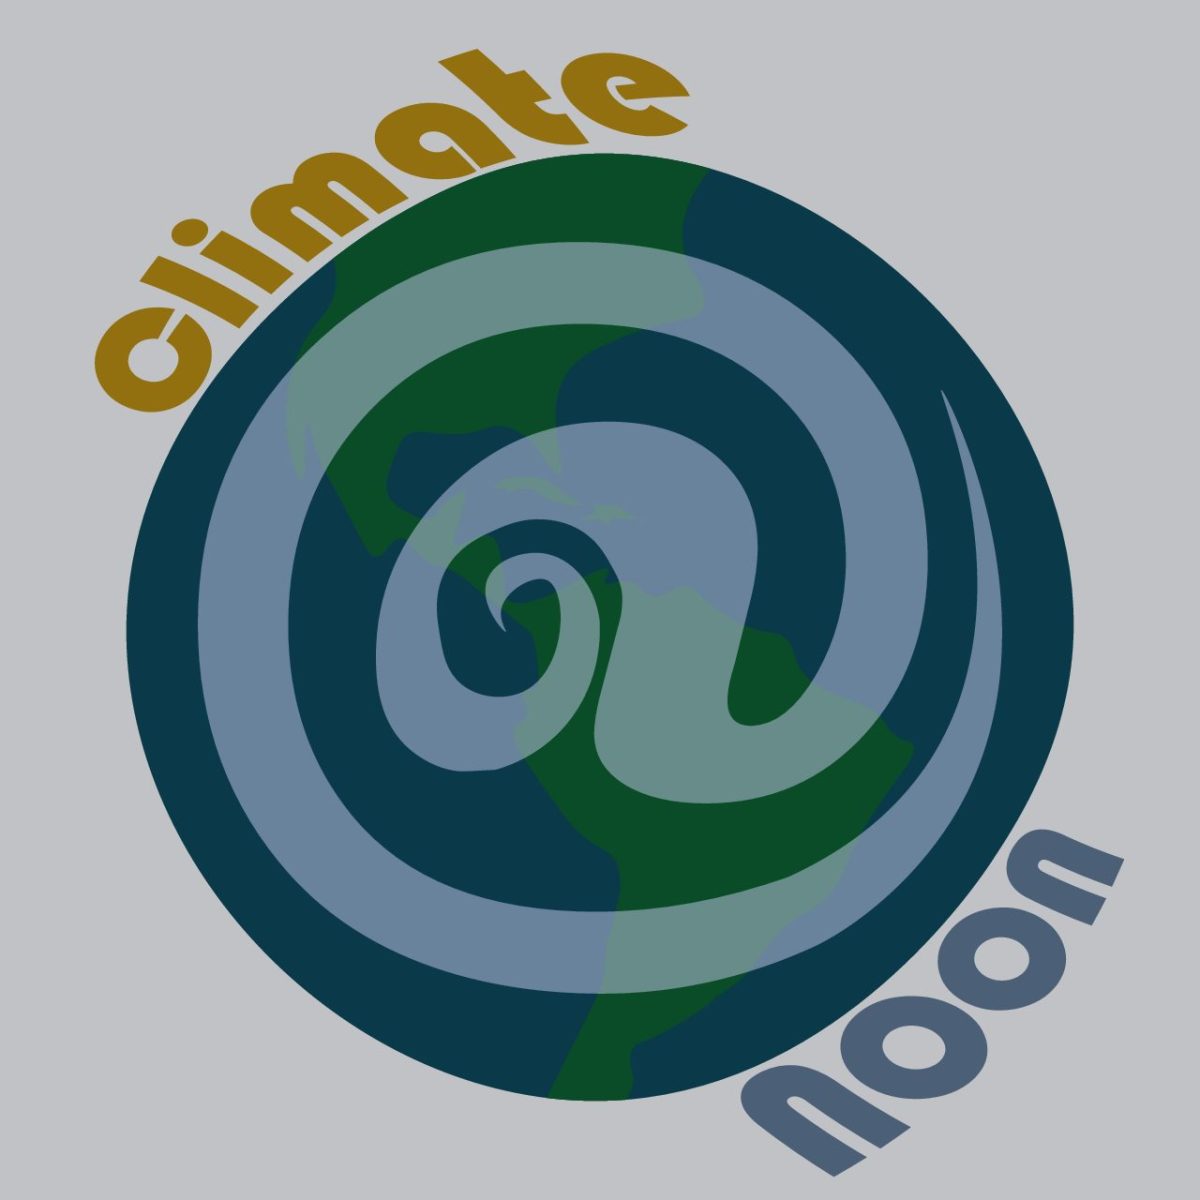 Climate at Noon returns this month featuring NMU alum